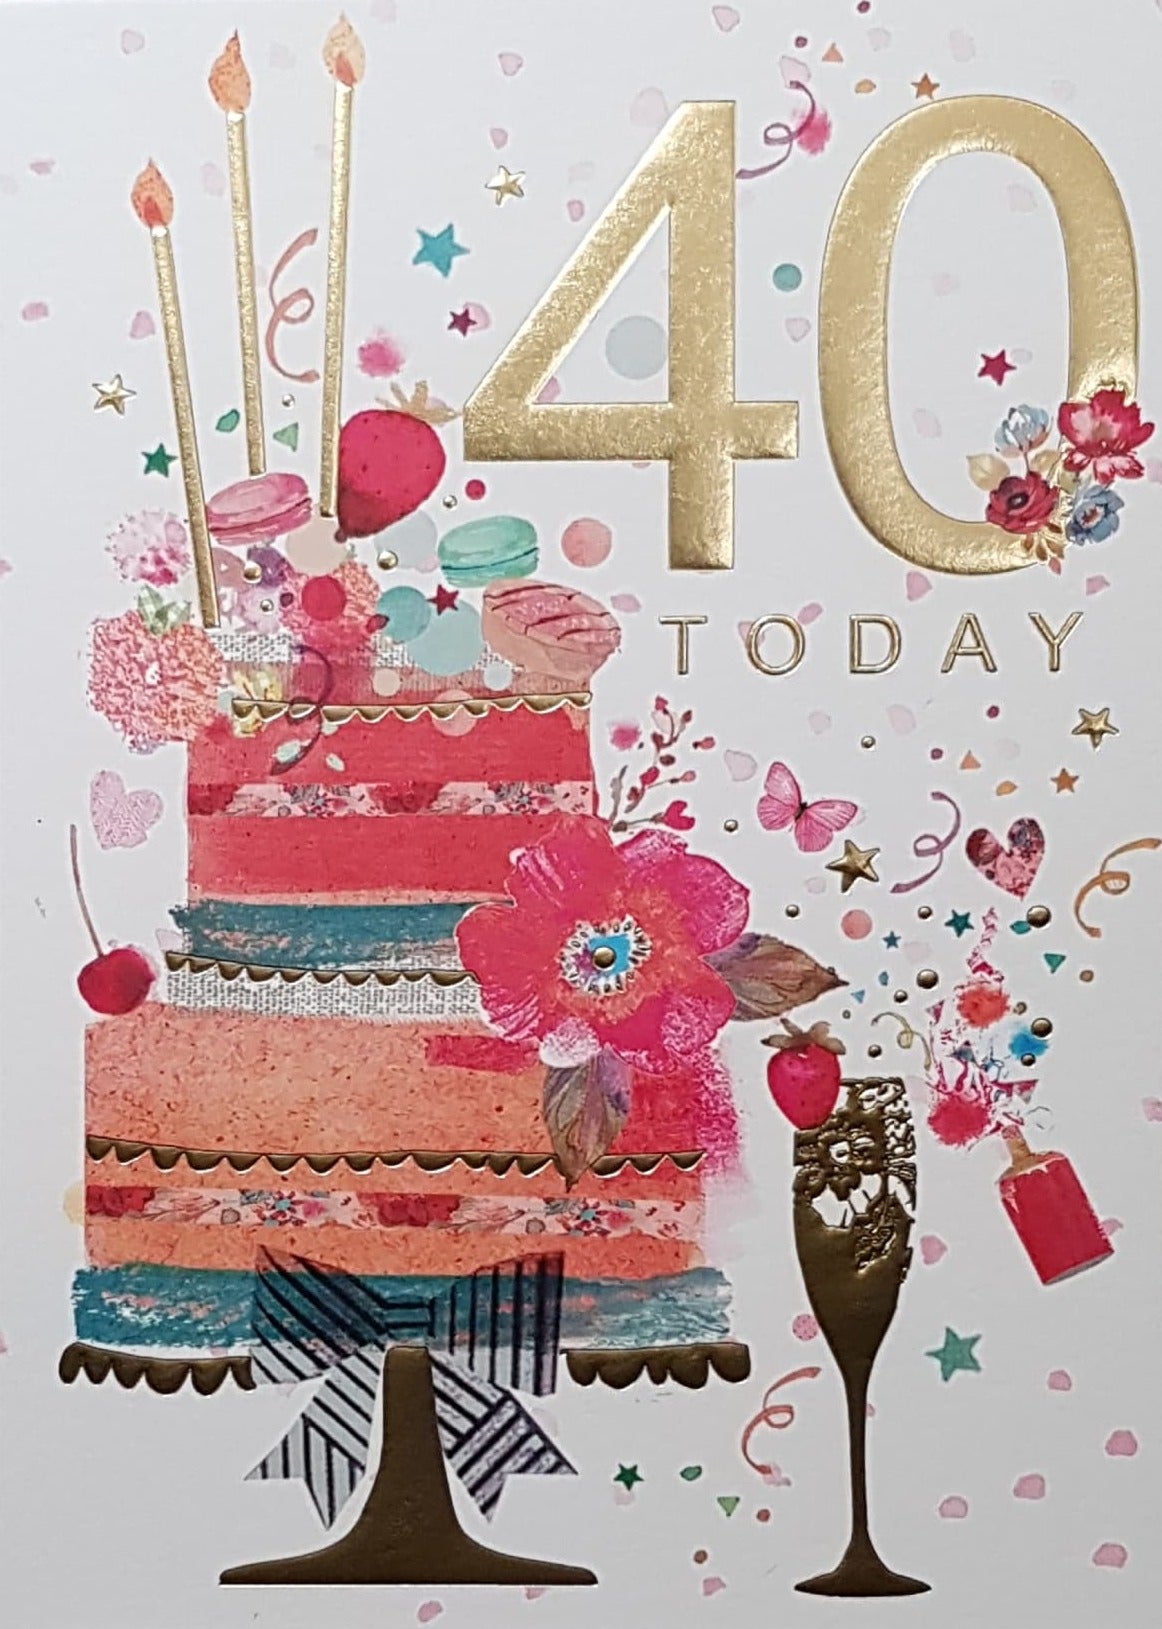 Age 40 Birthday Card - A Big Red Cake With A Red Flower & A Gold Font